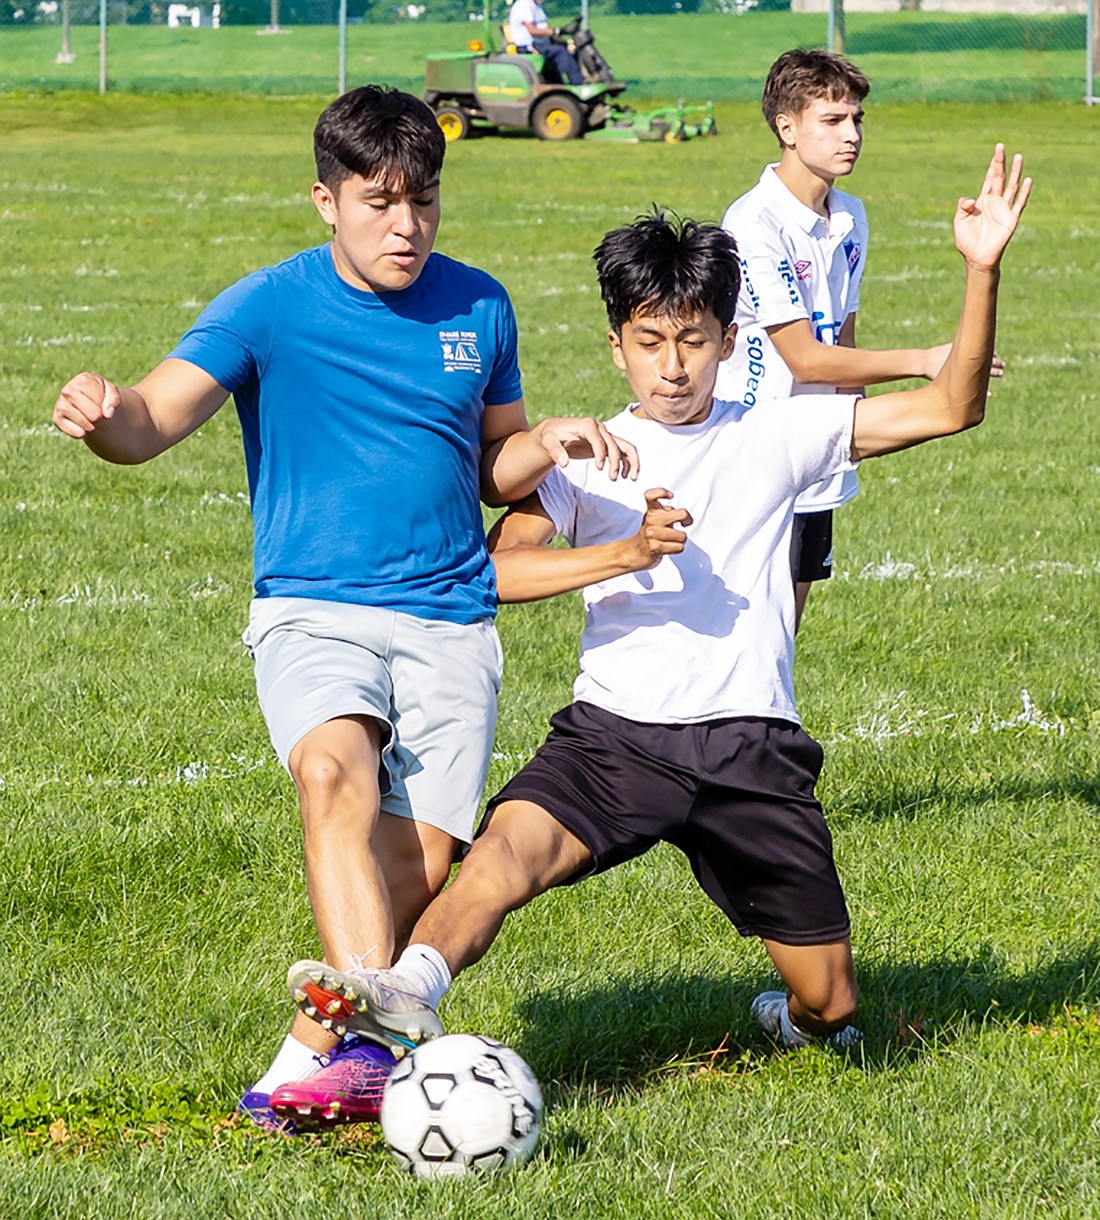 Alex Sigua tries to steal the ball from Zahid Cardenas during a scrimmage on the Port Chester High School field on the second day of practice and tryouts for the boys’ varsity soccer season on Tuesday, Aug. 22.